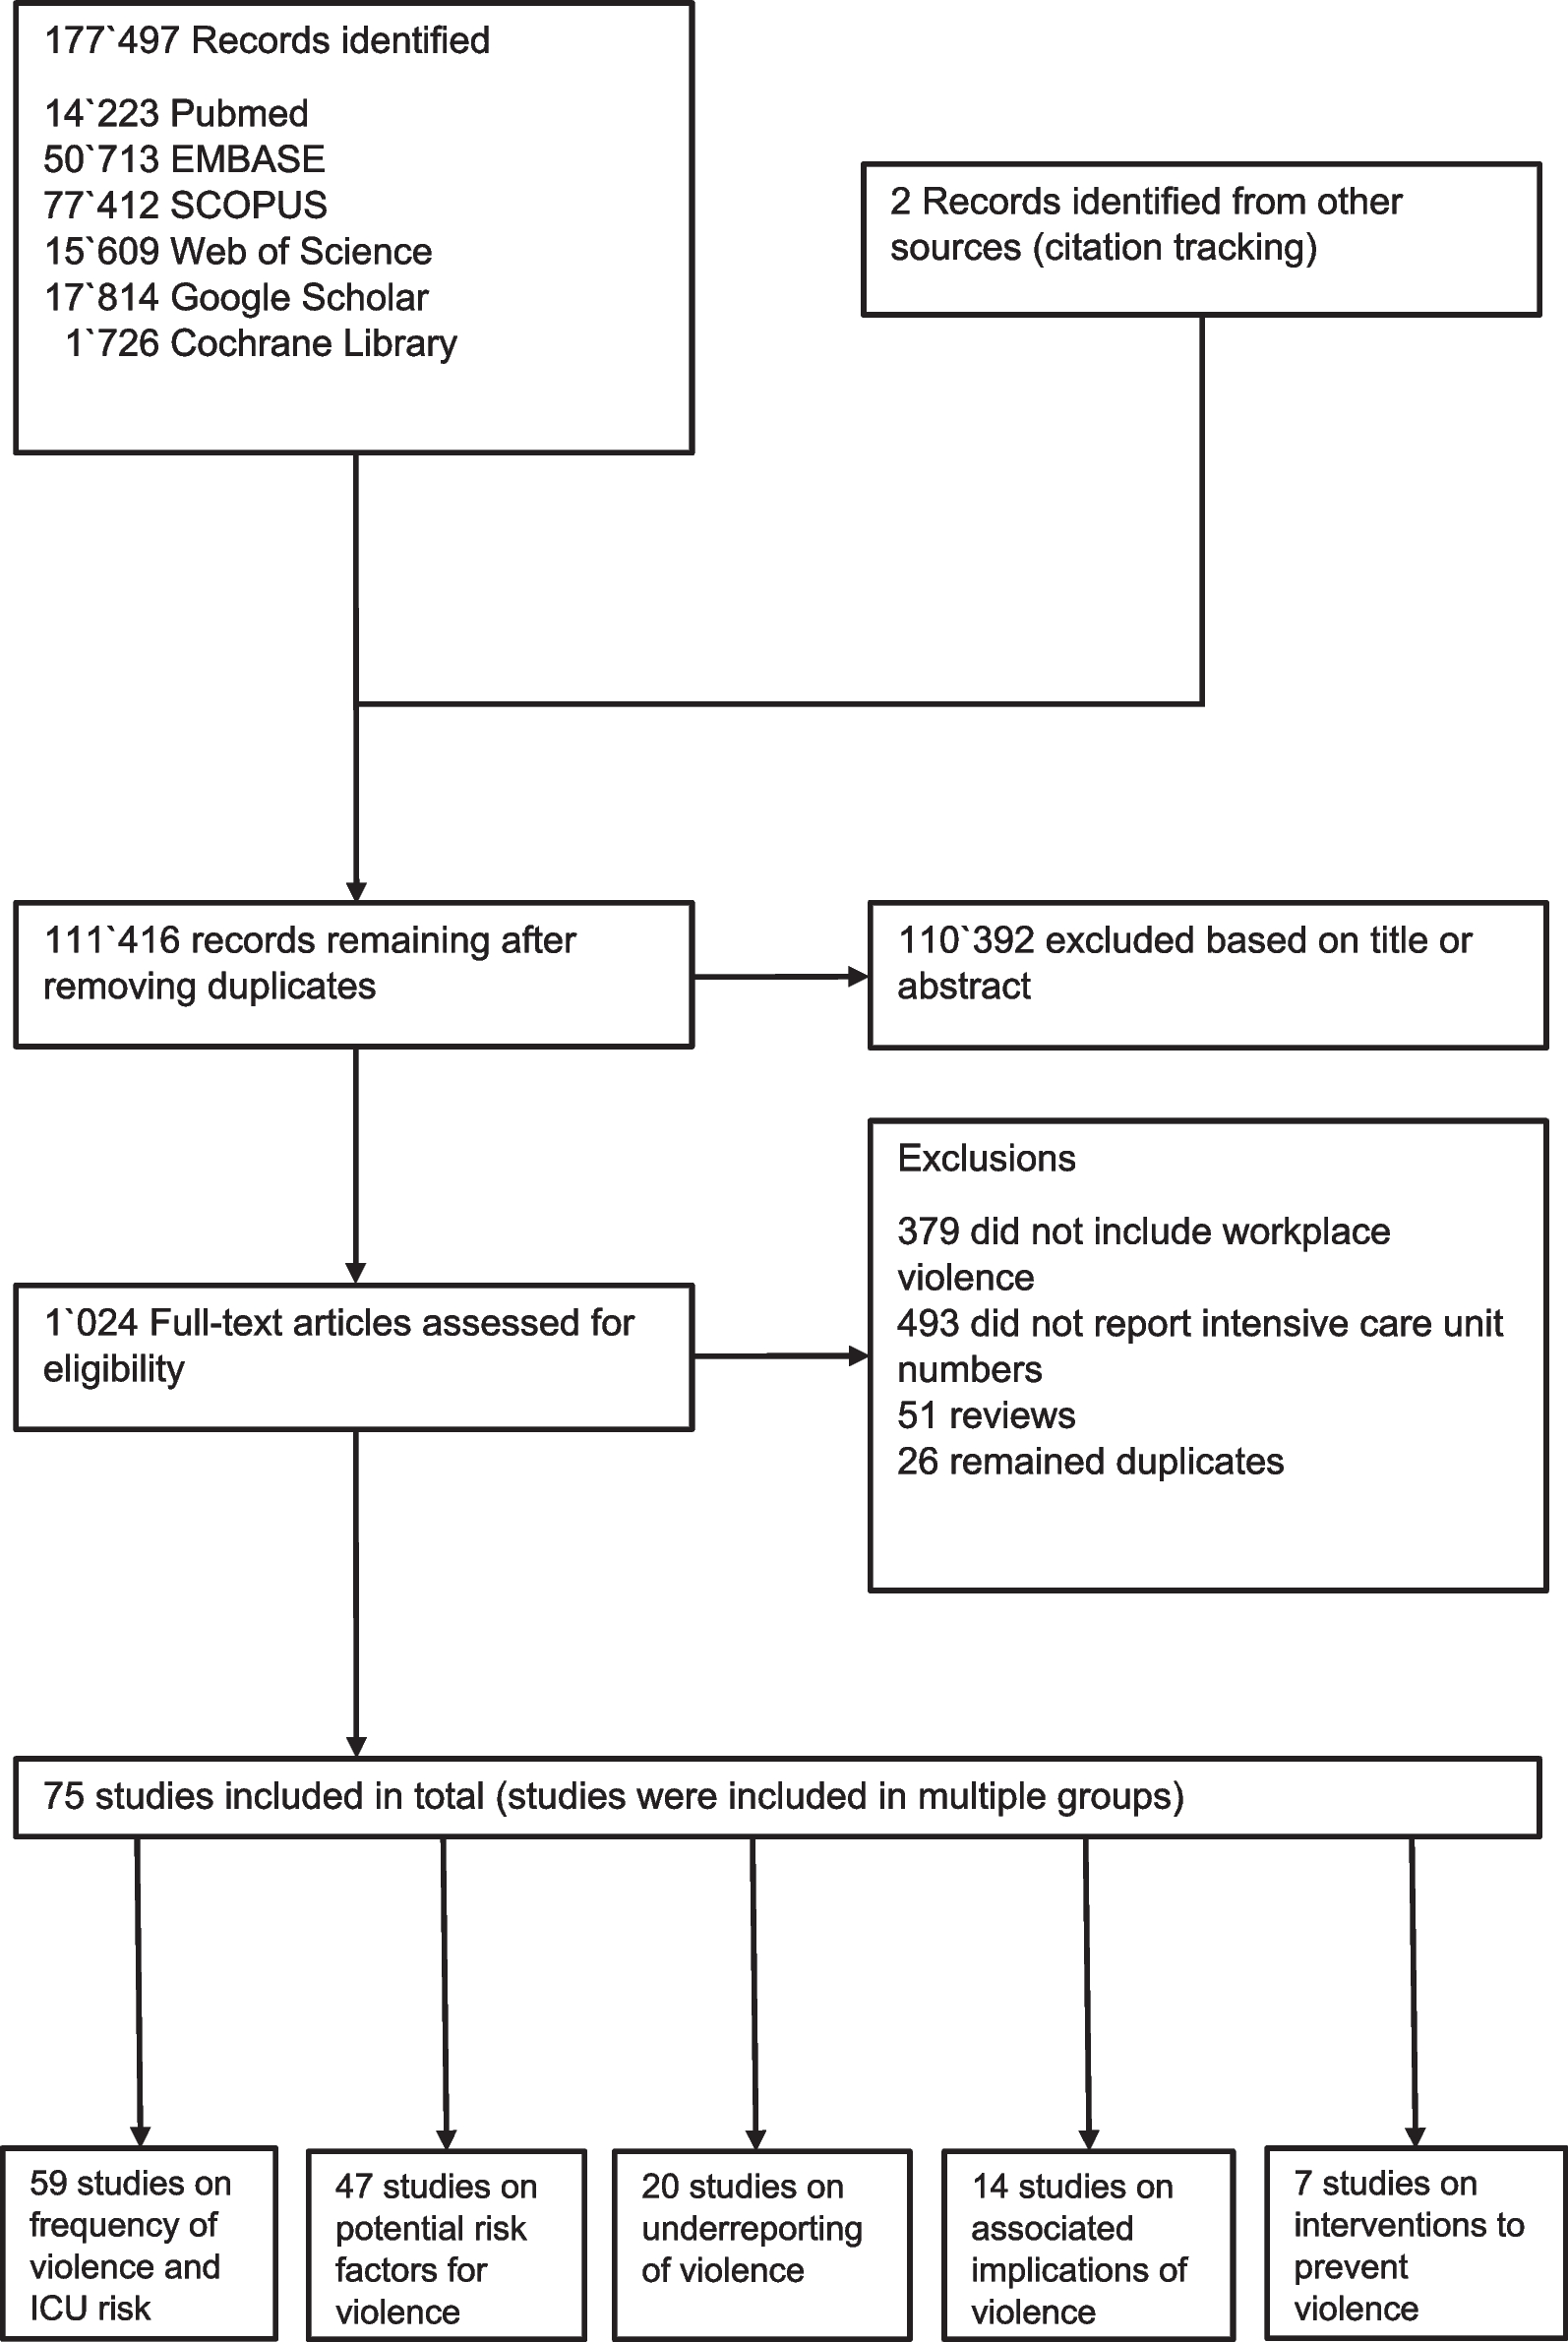 Violence against healthcare professionals in intensive care units: a systematic review and meta-analysis of frequency, risk factors, interventions, and preventive measures